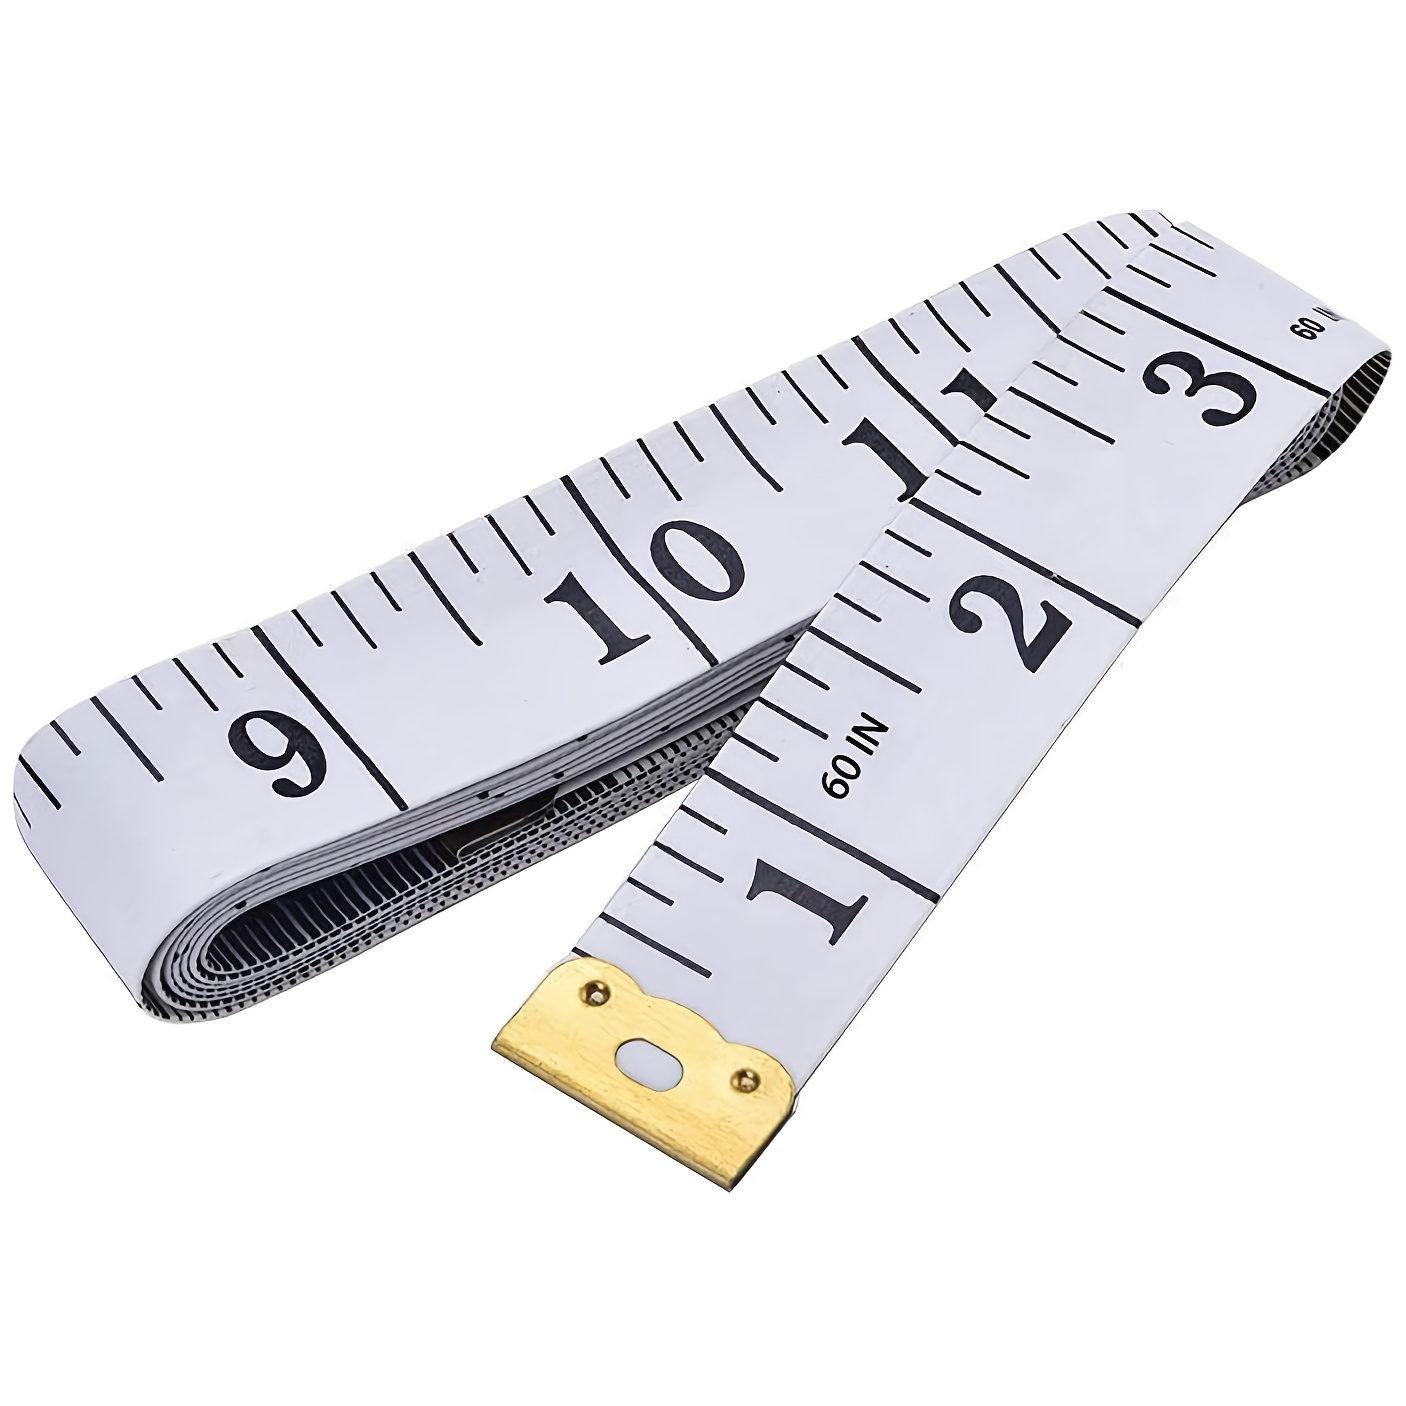 oditton Soft Measuring Tape, Flexible Tape Measure, Double Scale Fabric  Tape Measure, for Body Sewing Tailor Weight Loss Craft Ruler,150cm/60